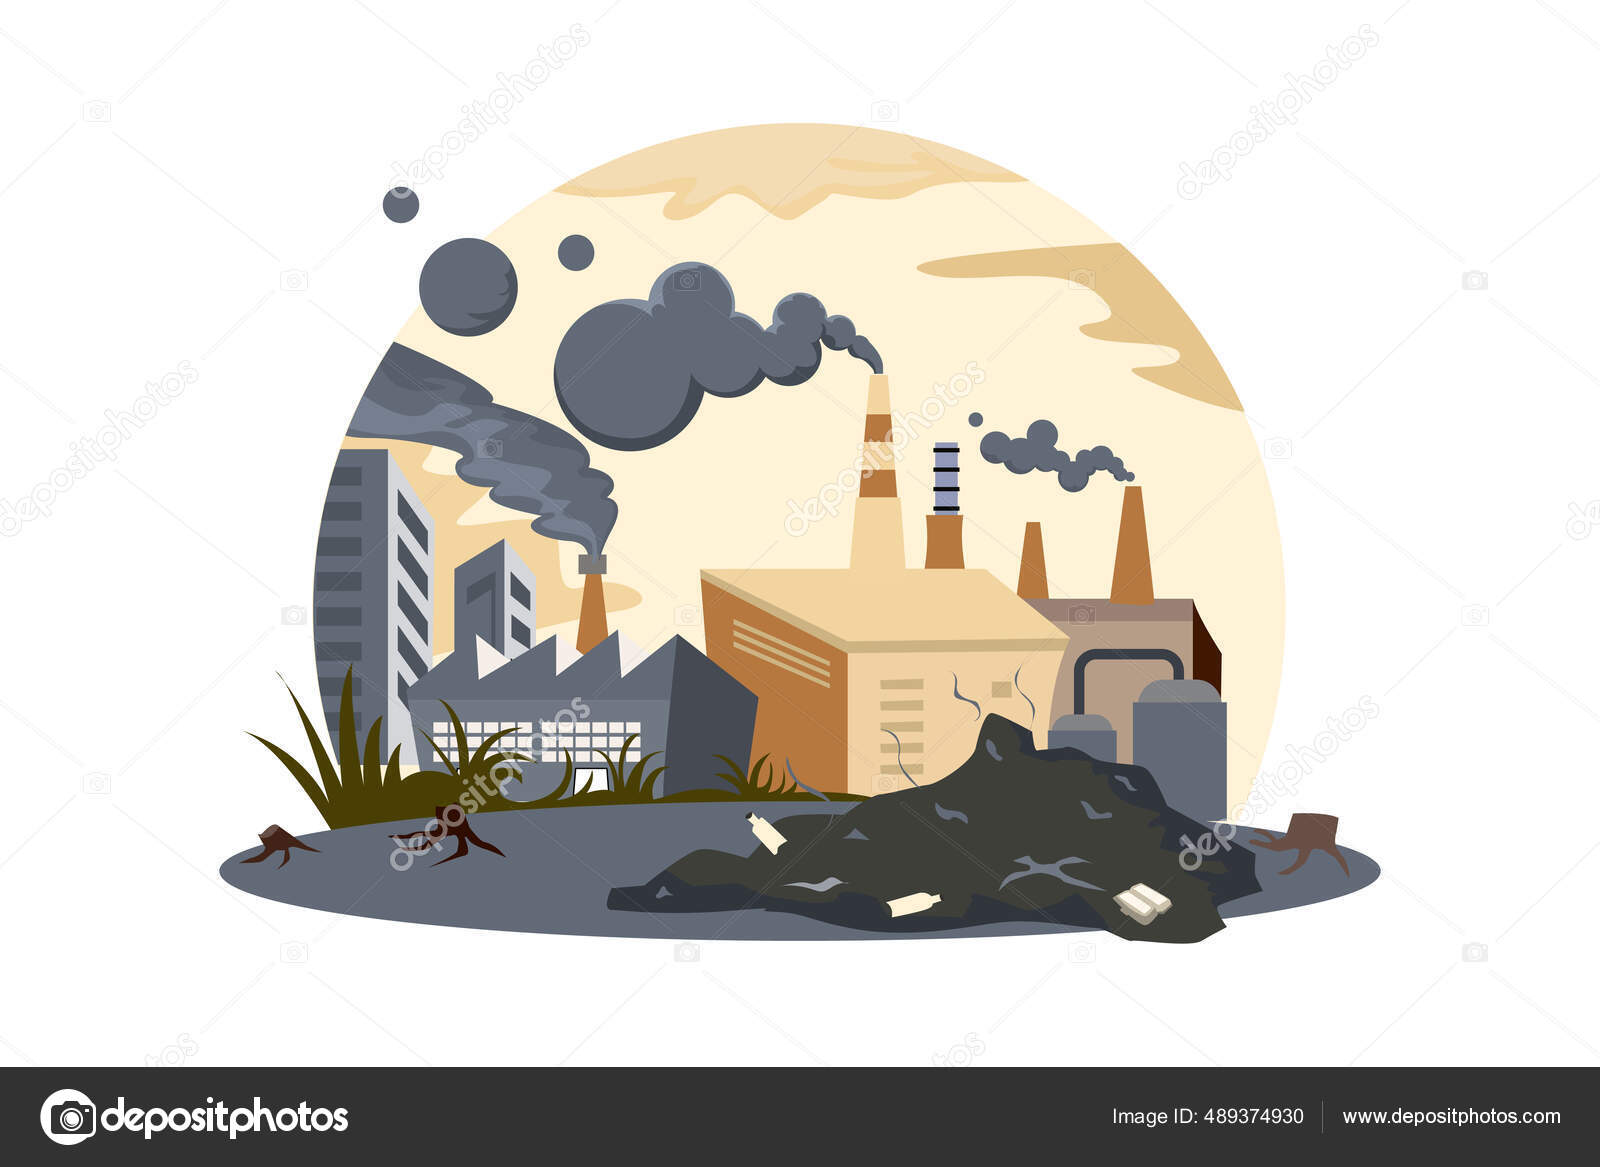 Premium Vector  Concept of environmental pollution factory or plant  against the background of large pipes throwing smoke and steam into the sky